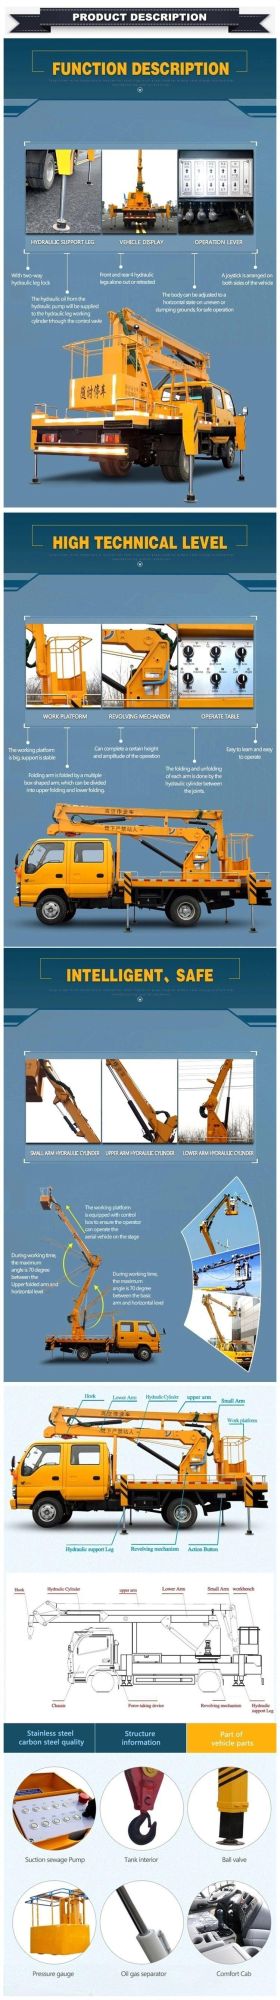 Jmc 16m 18m Spider Lift Vehicle 20m Articulated Boom Lift Truck with Good Price